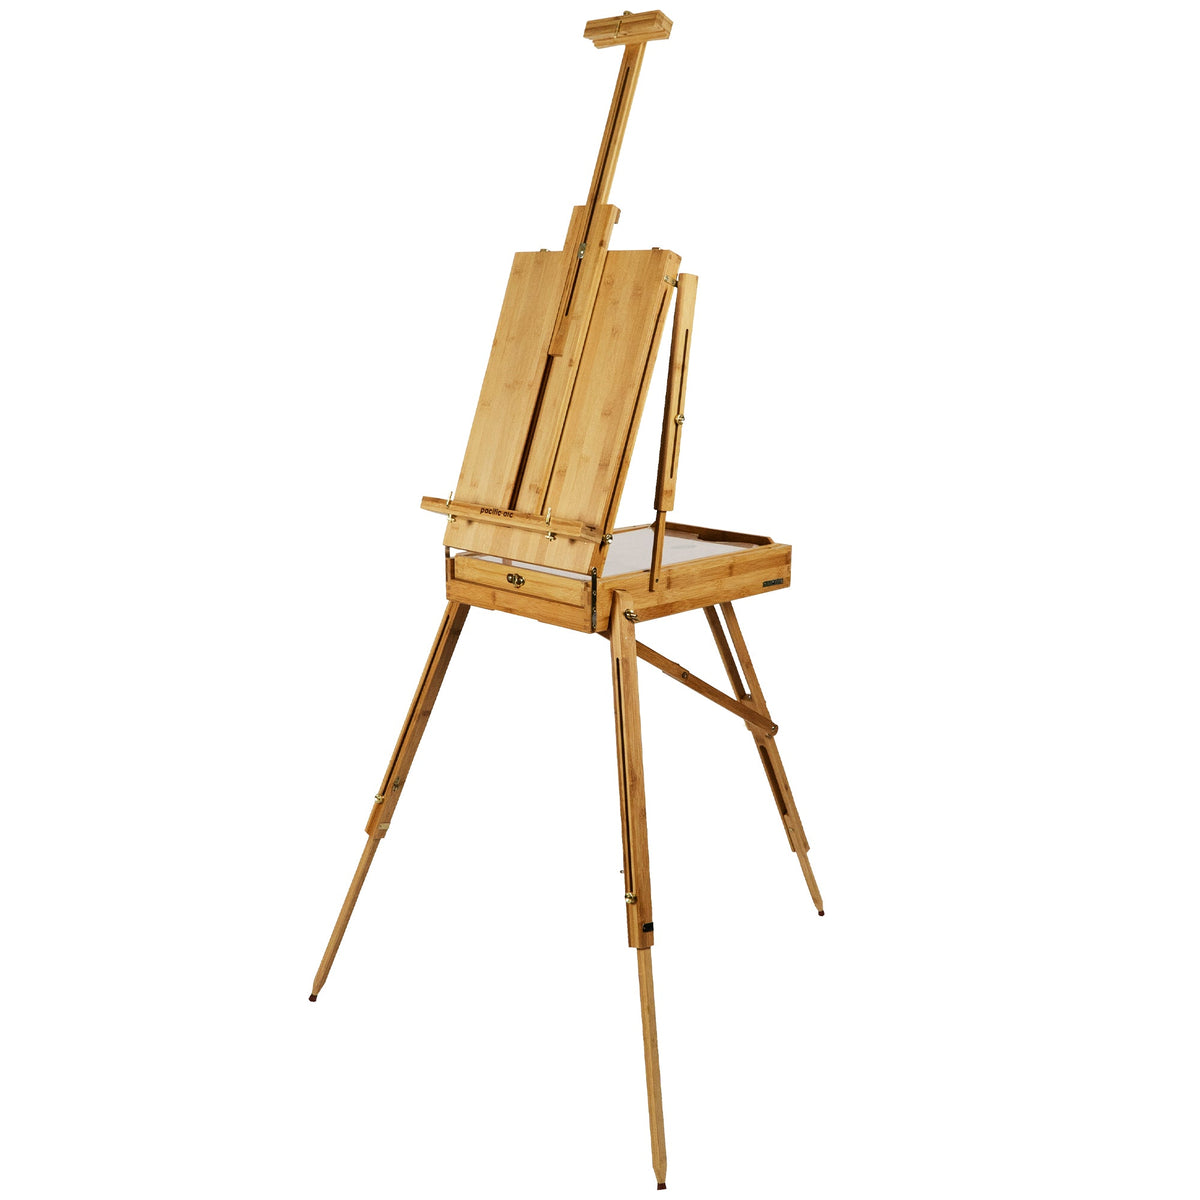 Pacific Arc - Solid Bamboo French Box Field Easel with Palette and Sketchbox, 34 Inch Canvas Size for Painting, Drawing, Watercolors,Sketching, Pictures, Signs, Posterboards